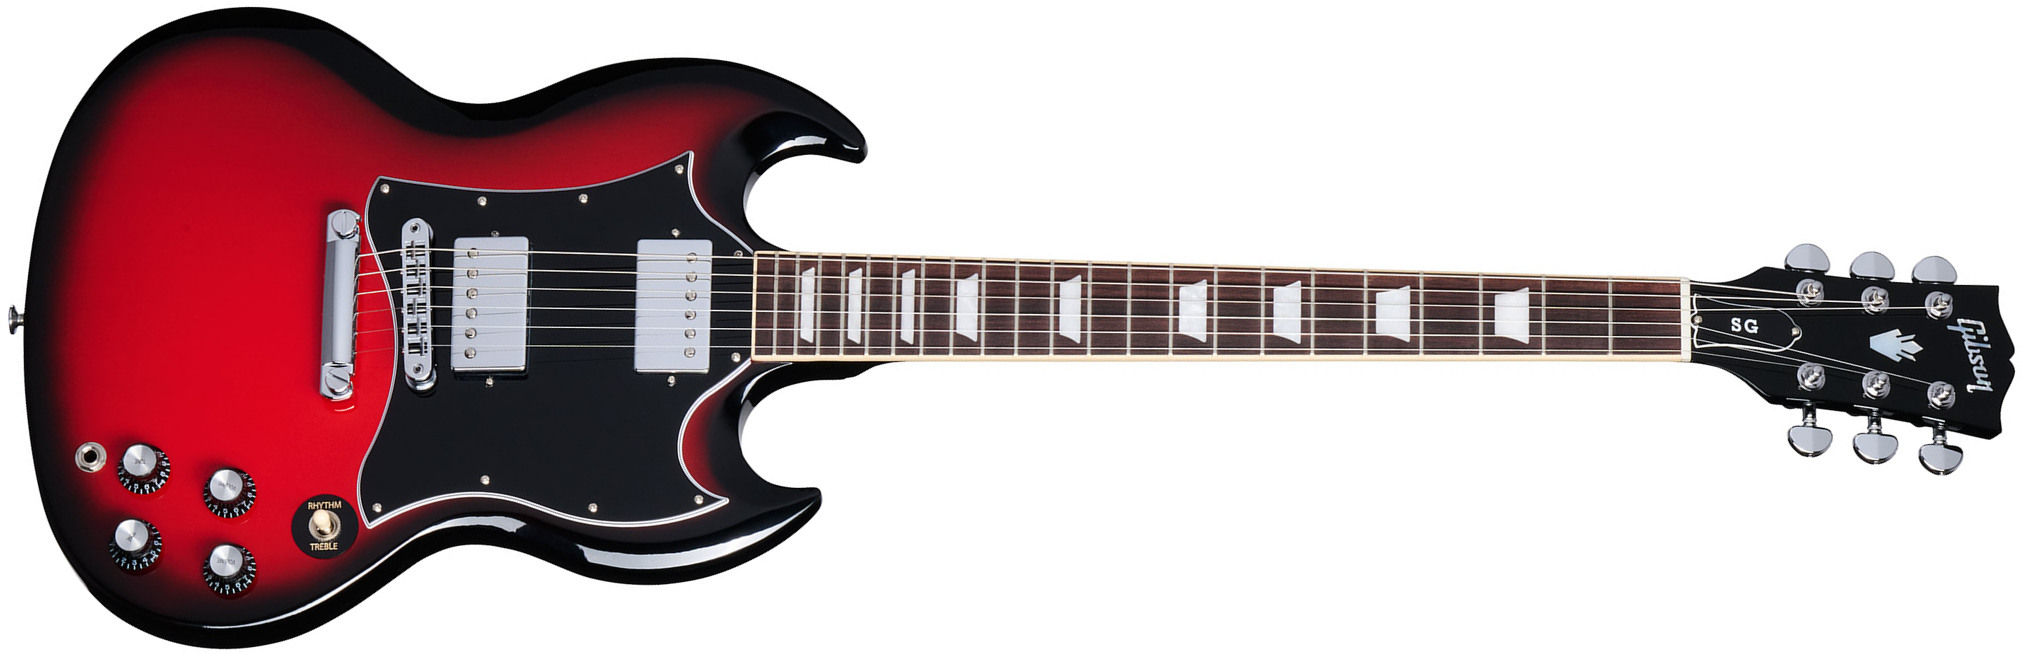 Gibson Sg Standard Custom Color 2h Ht Rw - Cardinal Red Burst - Double cut electric guitar - Main picture